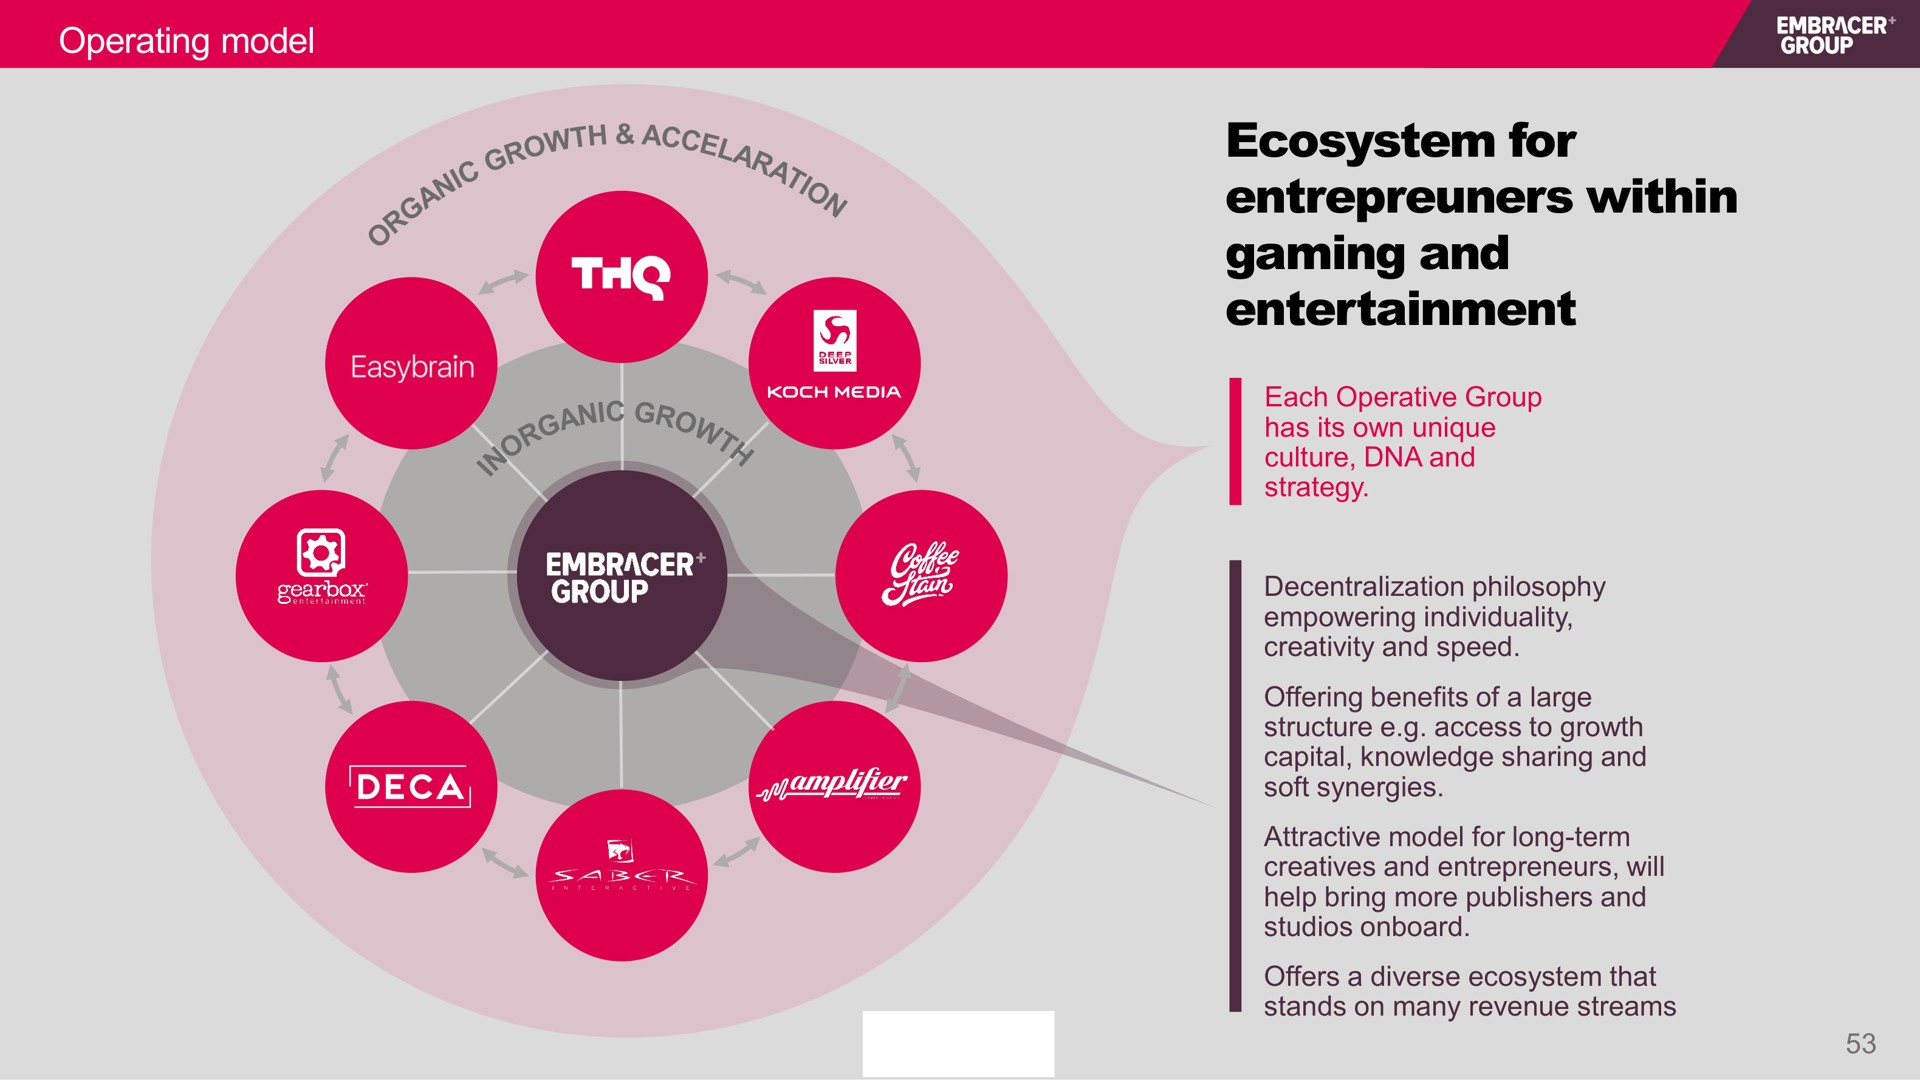 operating model ecosystem for within gaming and entertainment group embracer group | Embracer Group